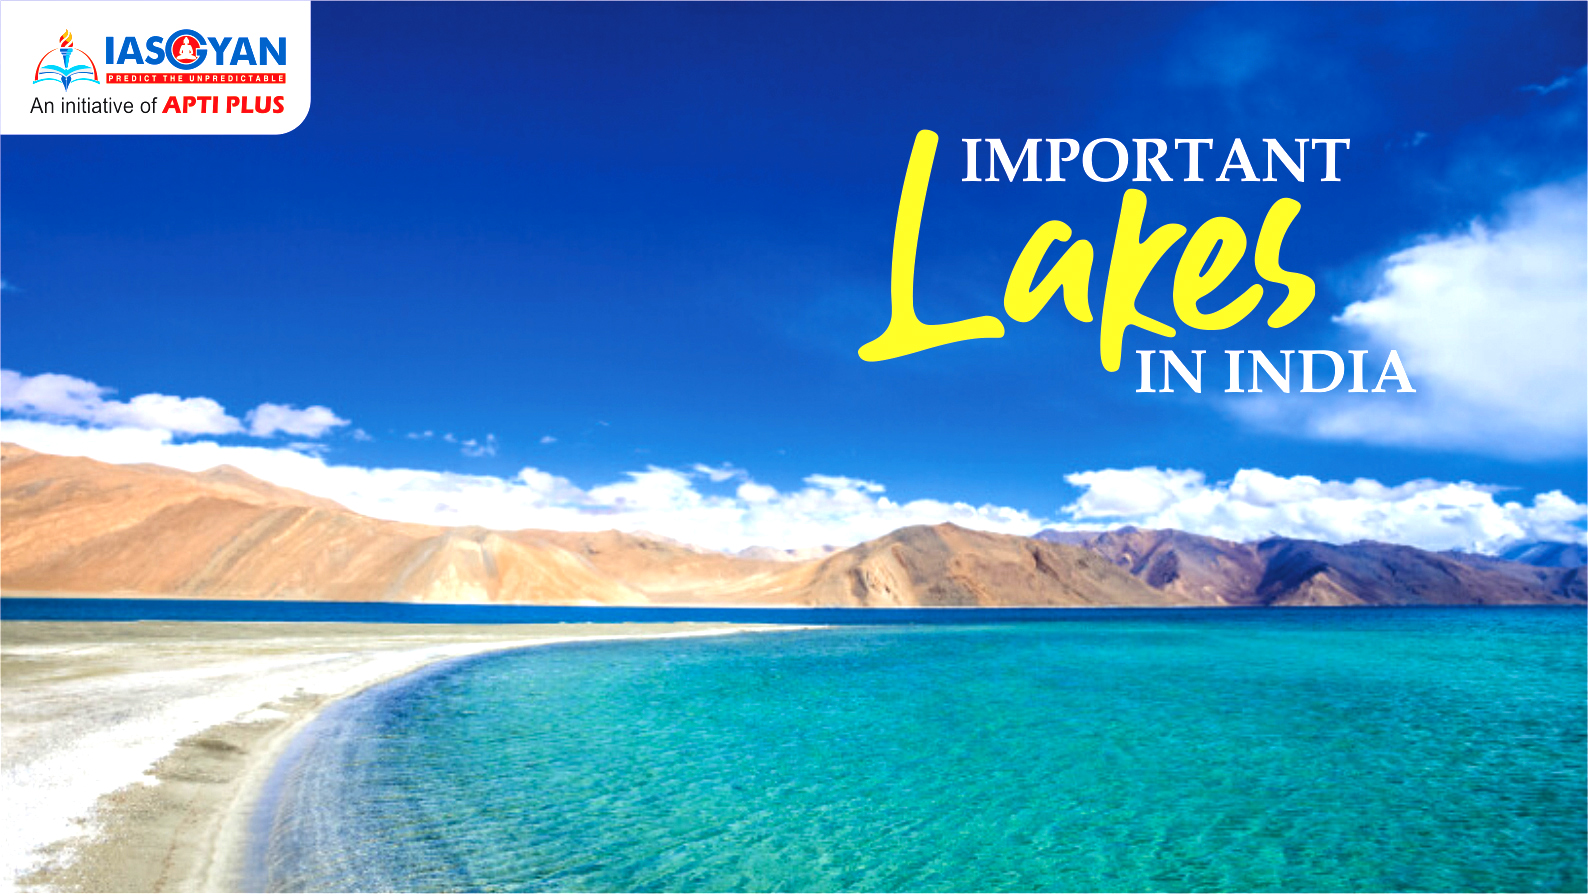 IMPORTANT LAKES IN INDIA